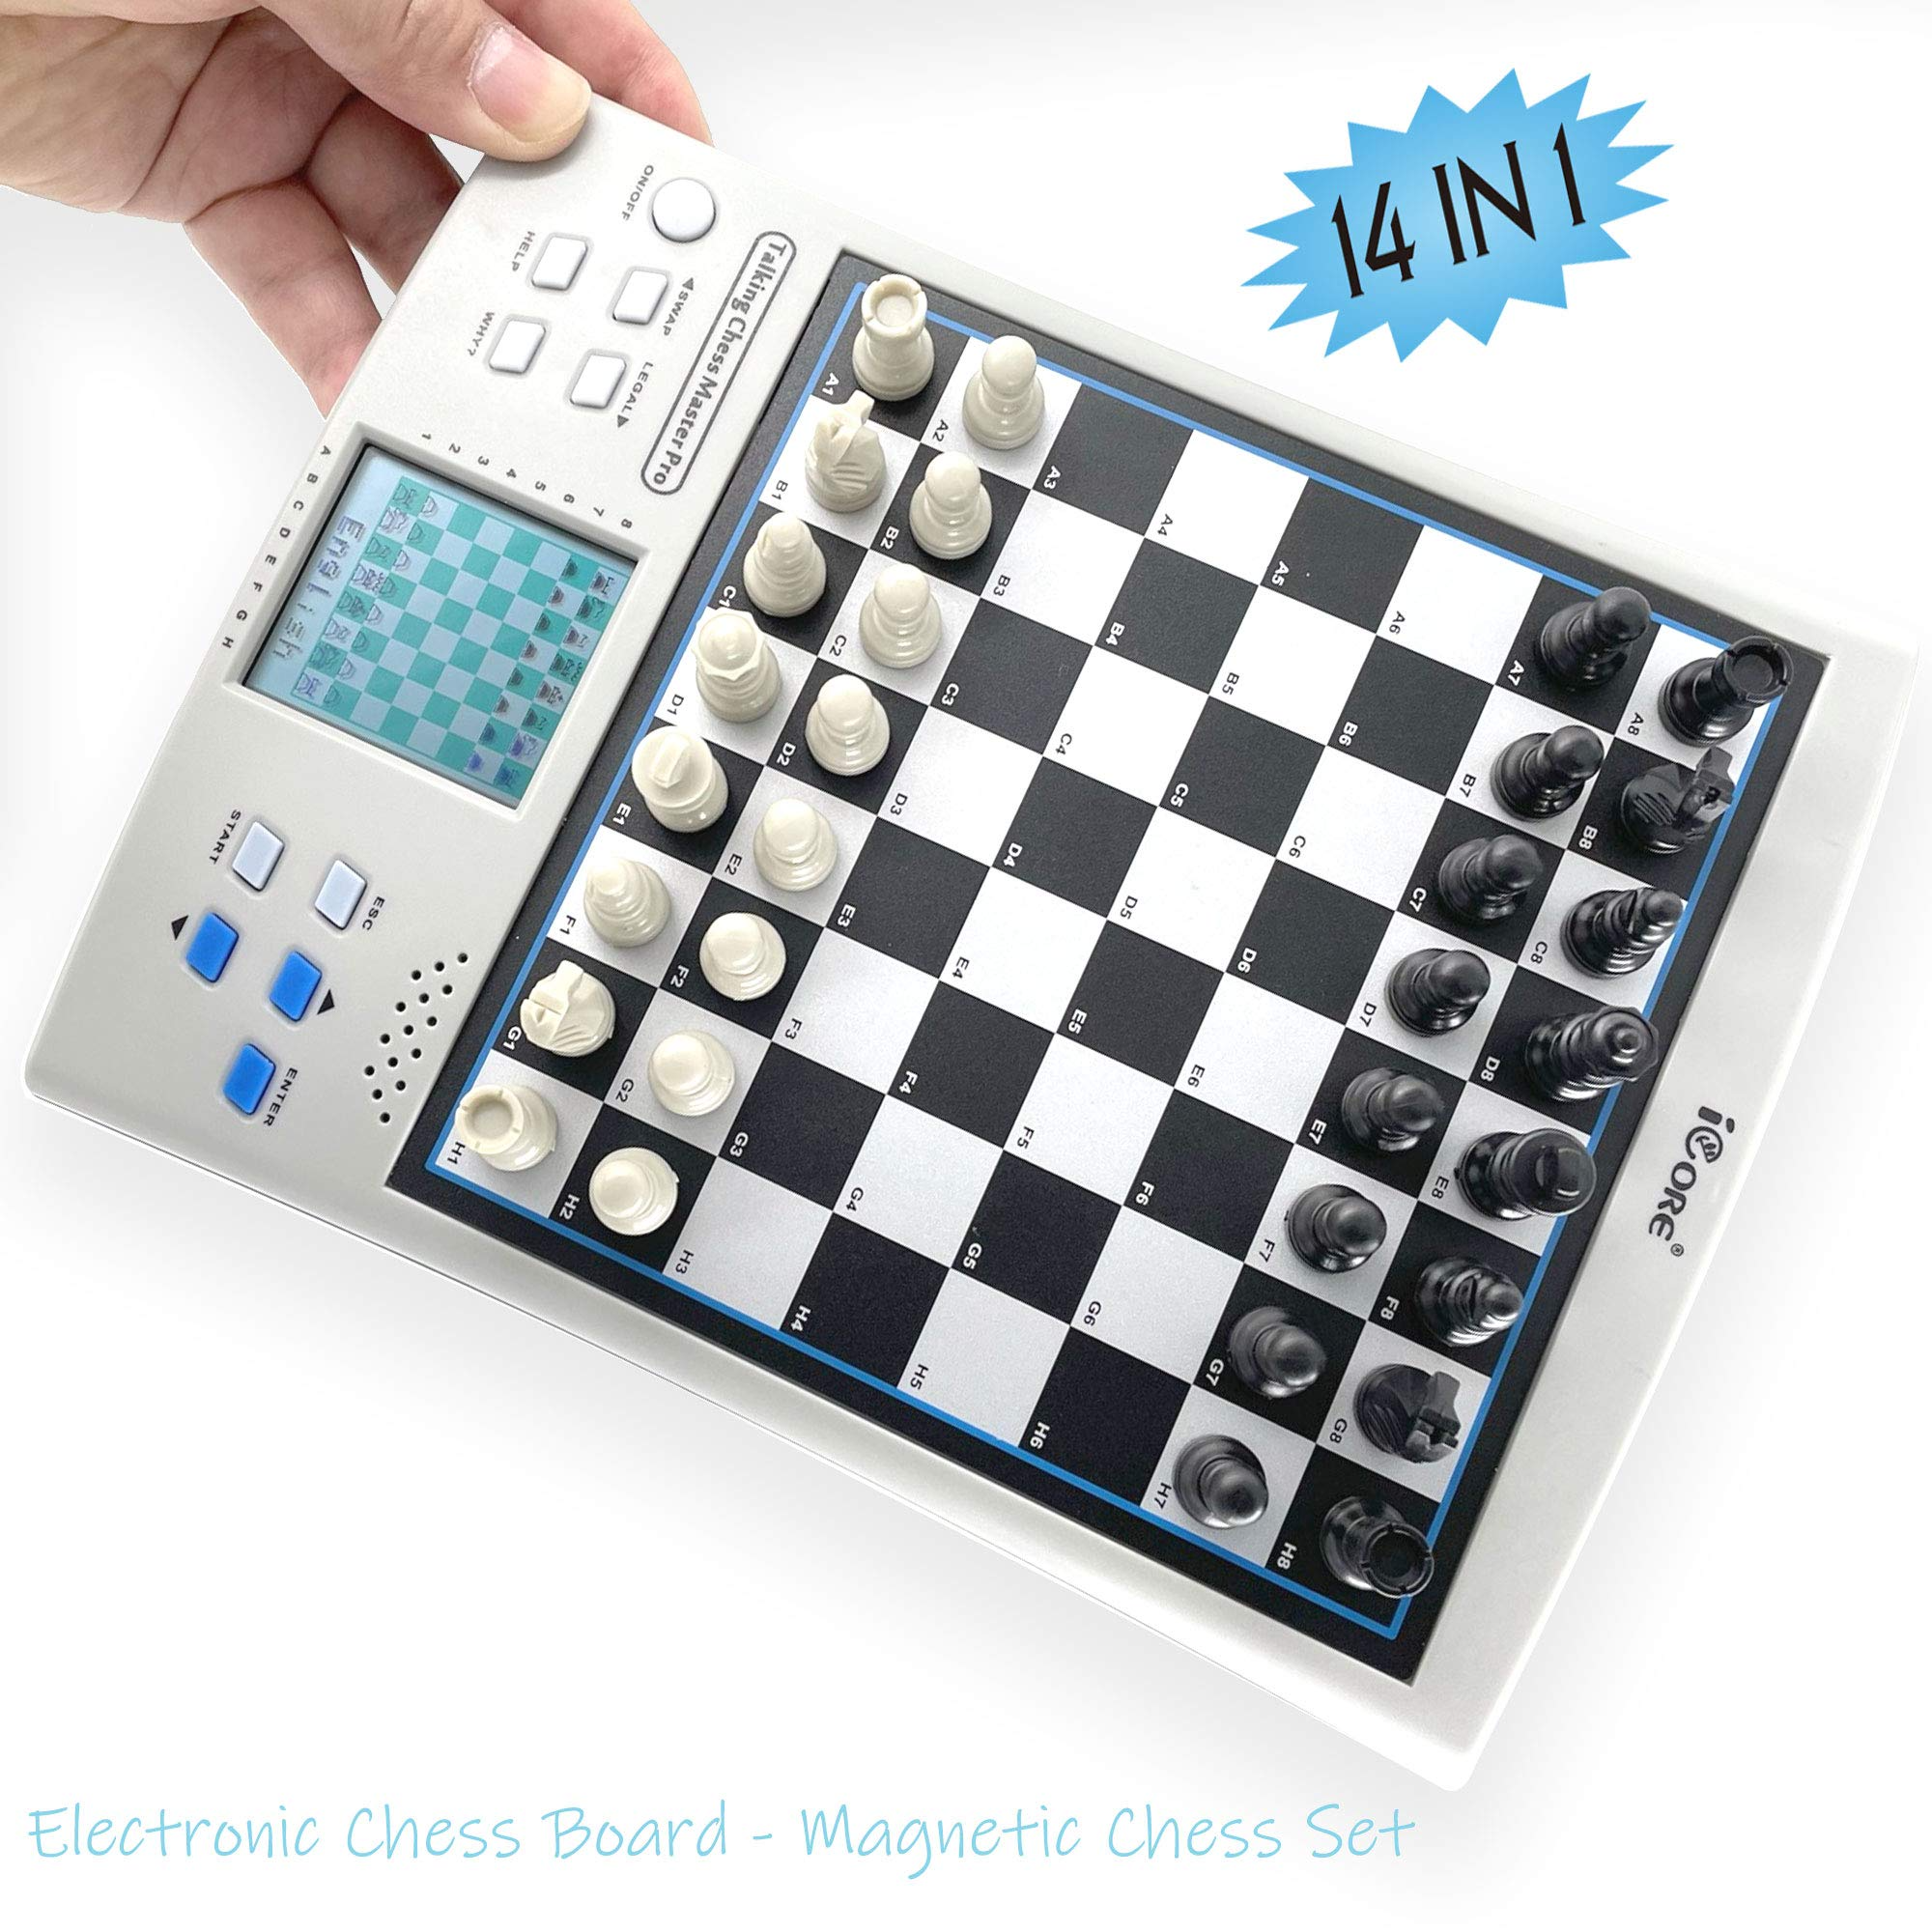 iCore Chess Set, Electronic Talking Chess Board Set, Travel Chess and Magnetic Checkers Game, Educational Toys Chess Set